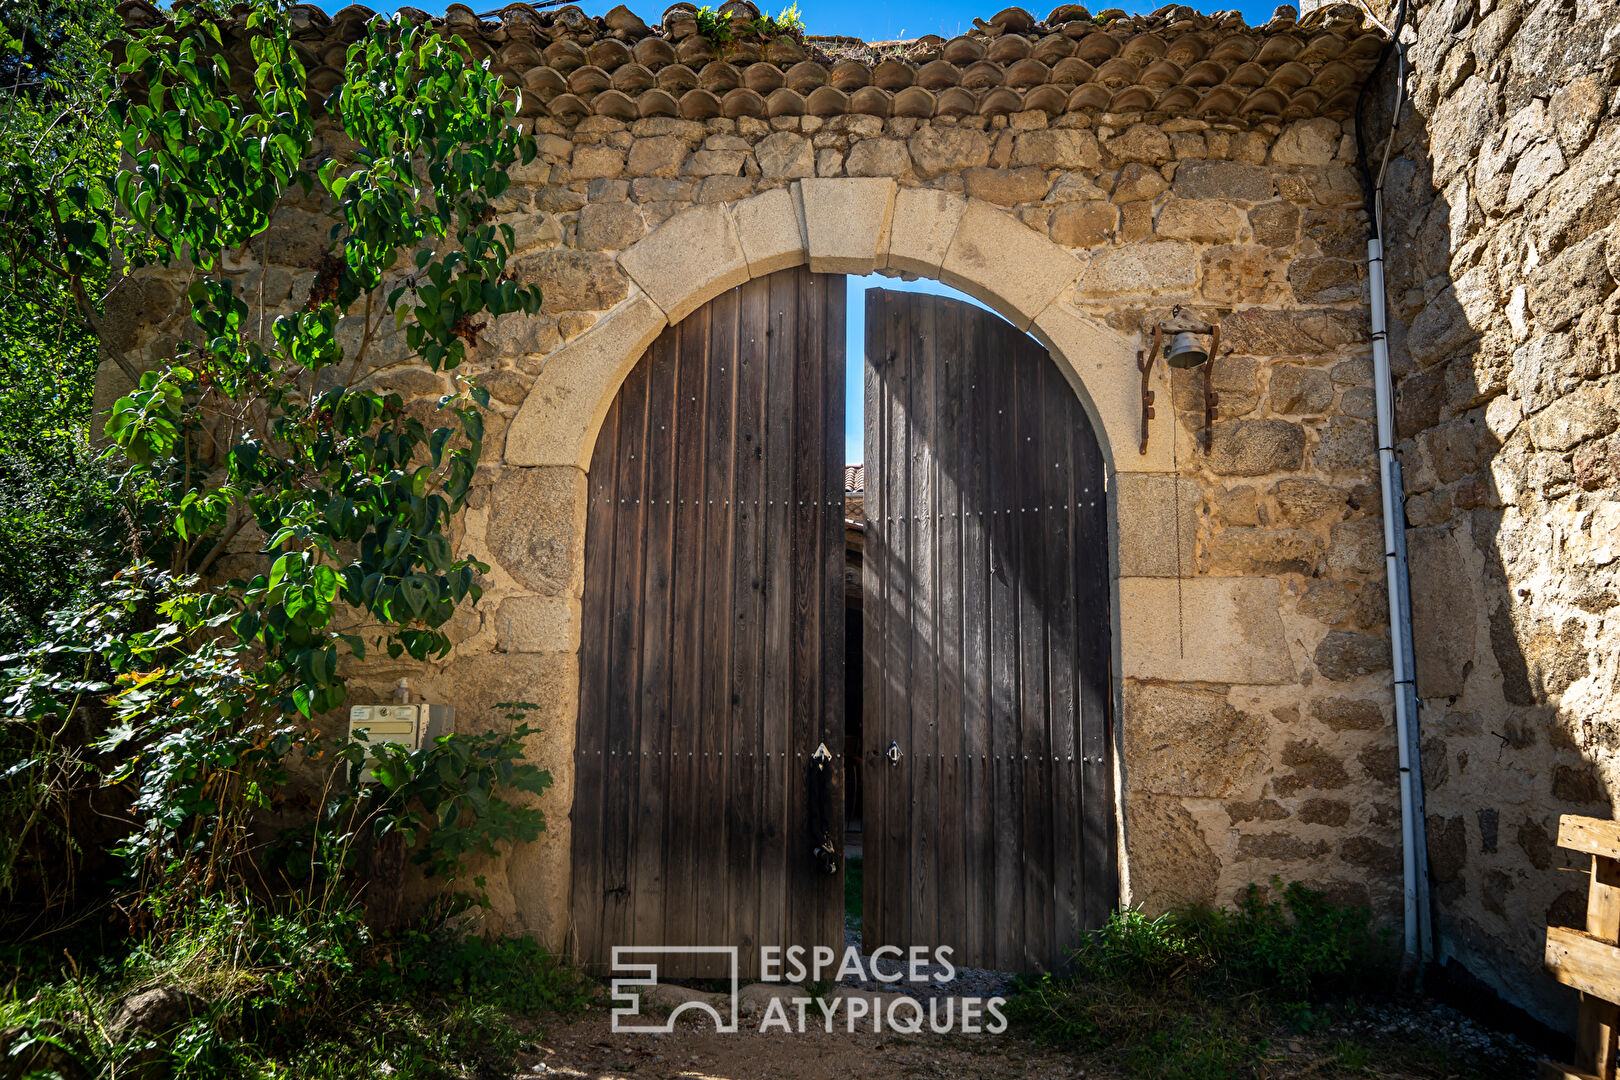 On nearly 7 hectares, the castle farm, with its atypical architecture, is home to many projects.